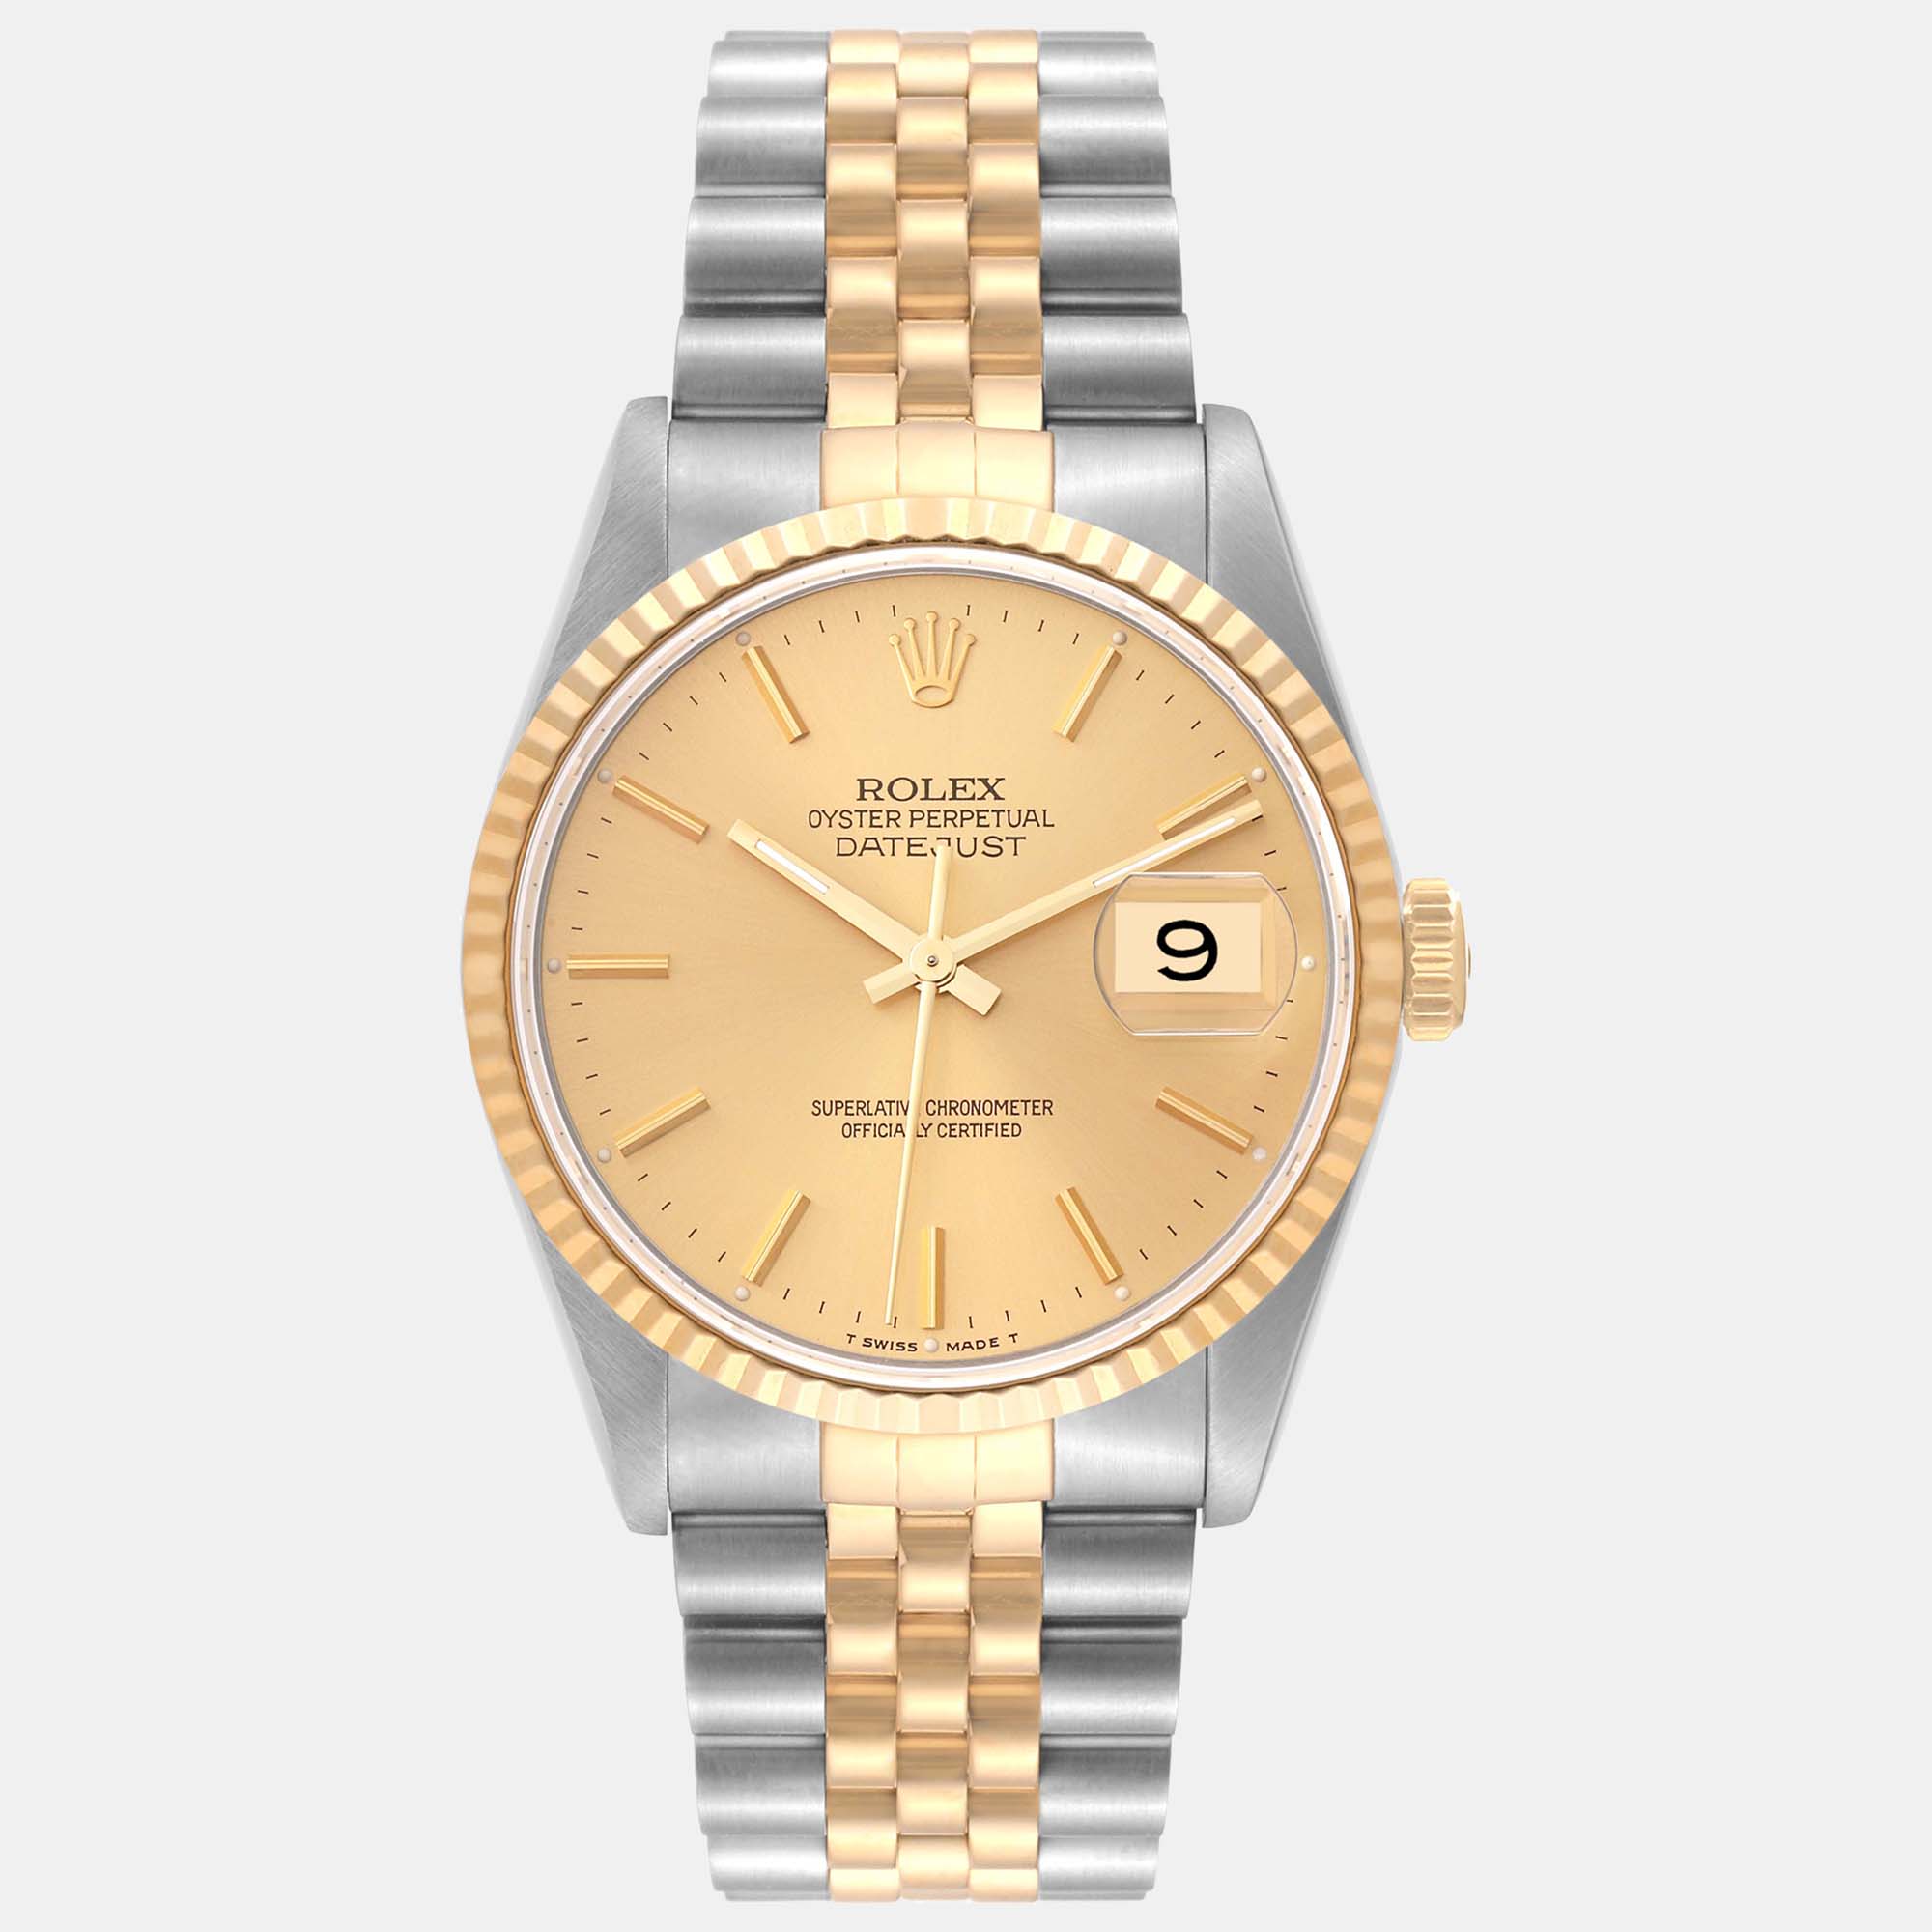 Discover the essence of luxury with a genuine Rolex watch. Impeccable in design and engineering it embodies heritage precision and prestige making it the ultimate statement of success and style.